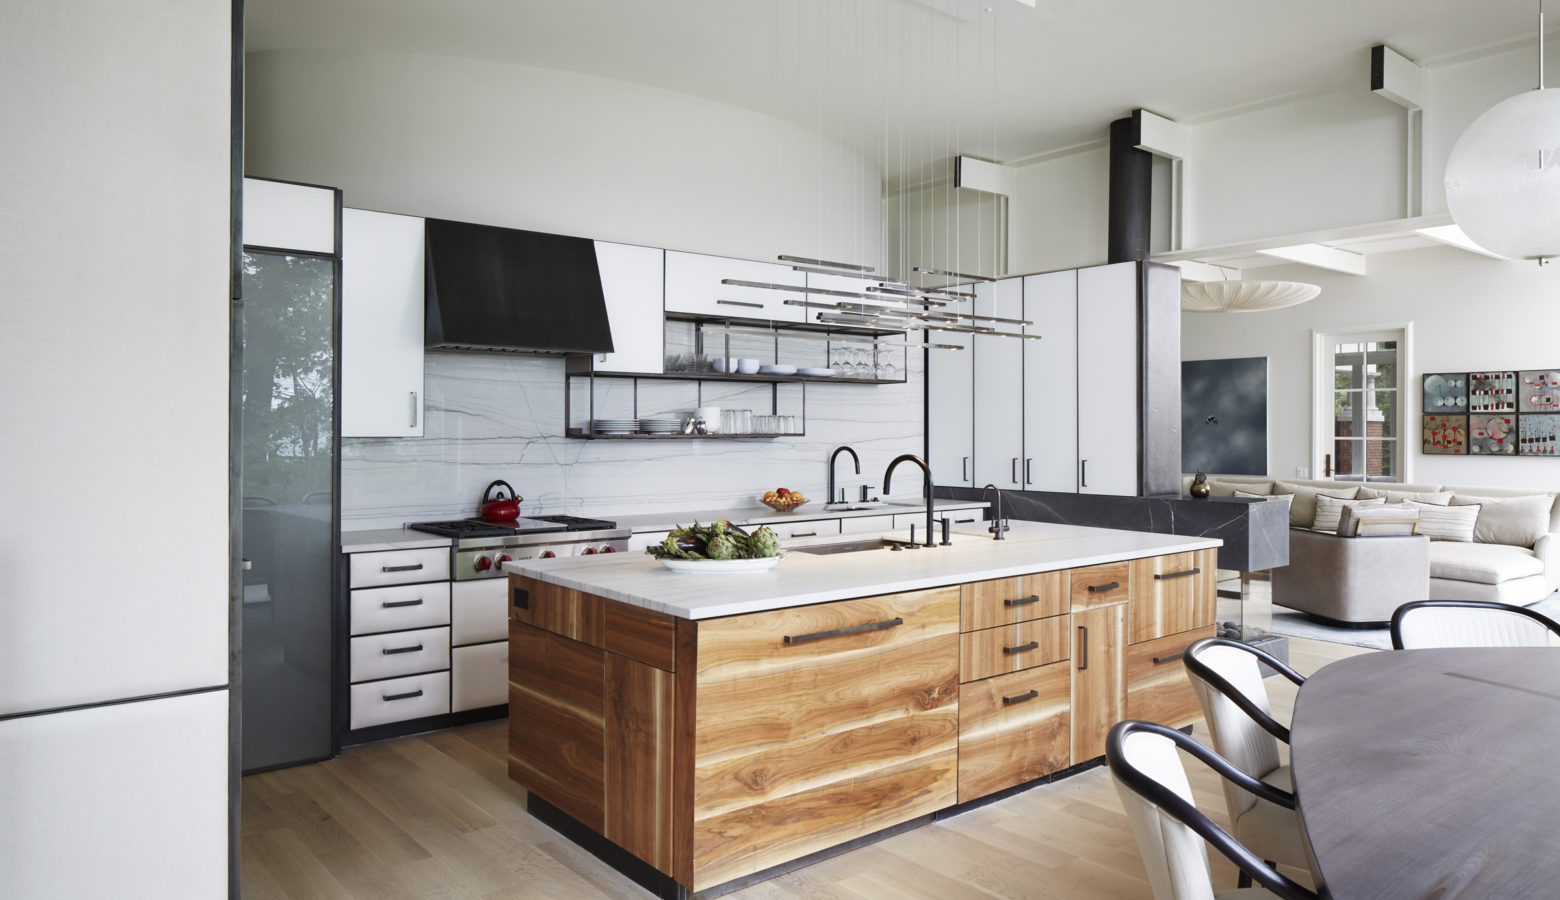 Designing a White Kitchen: 10 Ideas from a Residential Architect